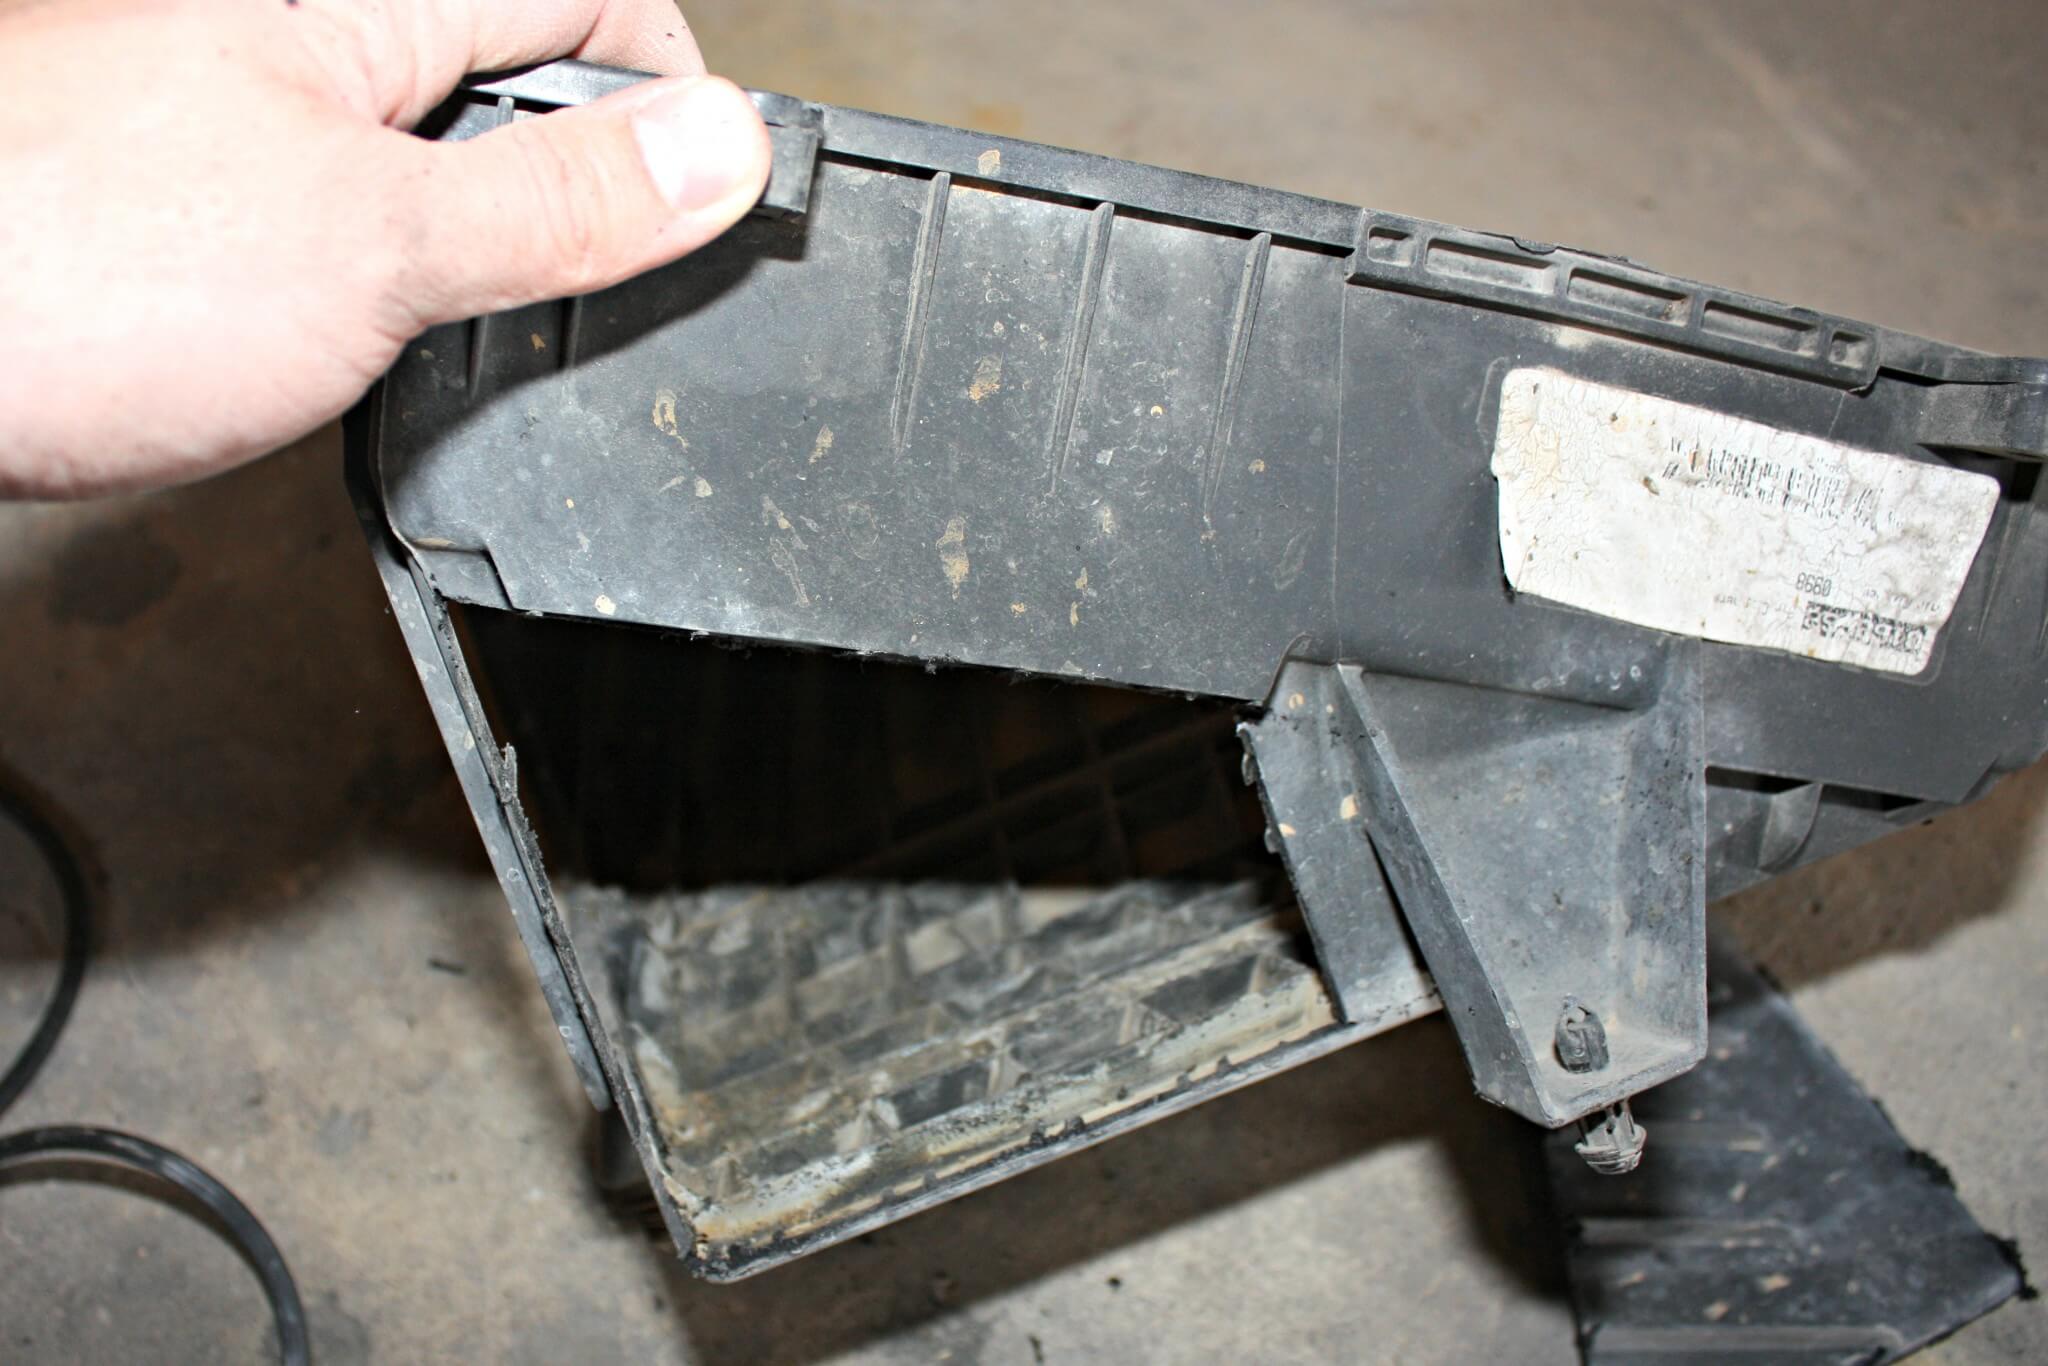 4. With the factory airbox removed from the truck, you’ll notice a small opening on the passenger side of the box where it pulls air from the inner fender well area. On the front side of the airbox, you’ll also notice a triangular-shaped section on the lower part of the box, seen here. This area can be cut out and removed to allow an additional spot for intake air to enter the box, adding some additional flow for the filter. Using a cutoff wheel, the plastic will cut easily. A small file can then be used to debur the edges before the box is reinstalled in the truck. While this may not seem like much, the added airflow can make an improvement over stock without costing you anything out of pocket.